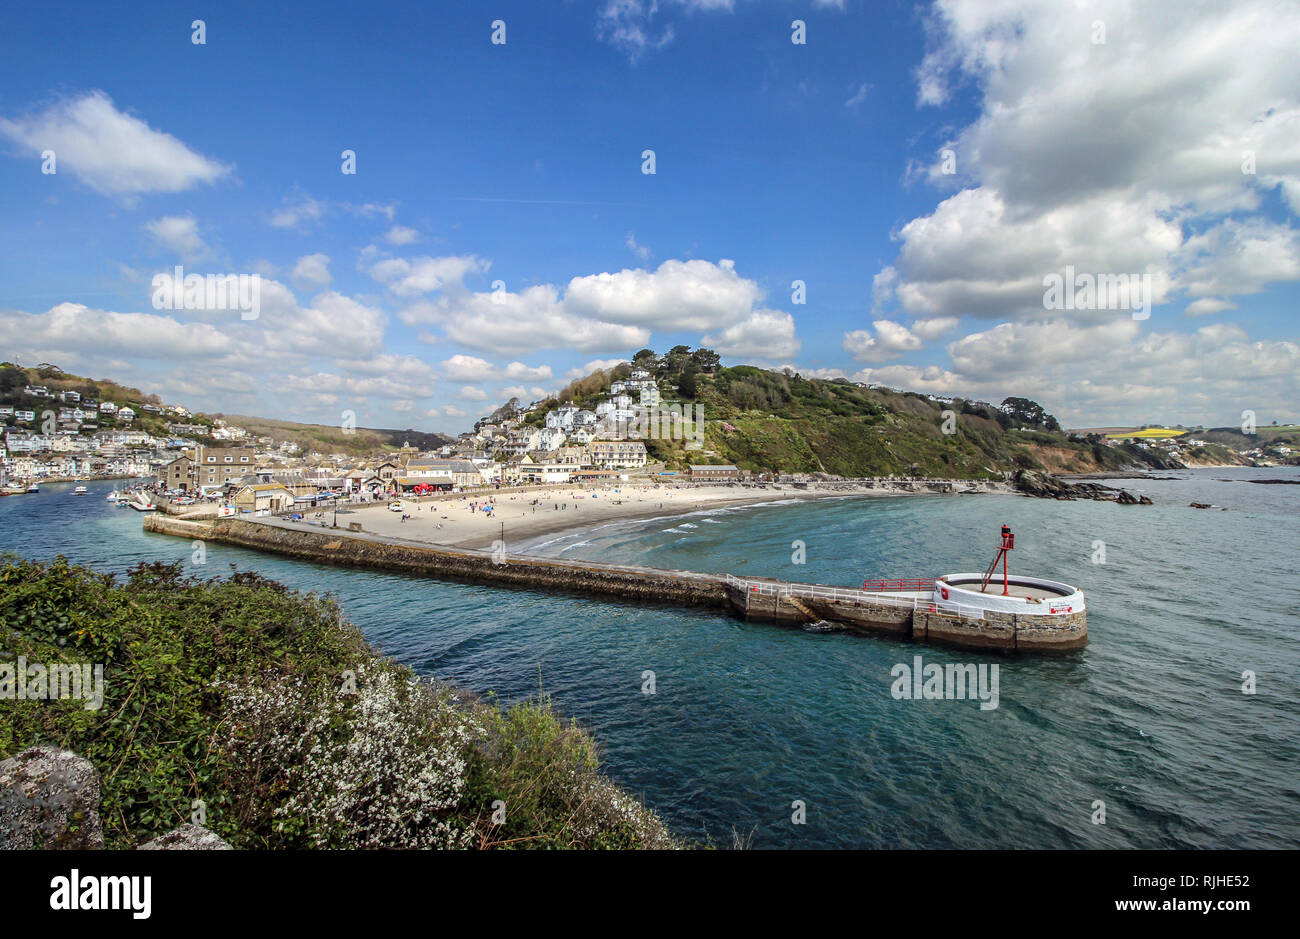 Banjo Pier between the beach and the river at East Looe, as seen from the high vantage point at Hannafore. Stock Photo